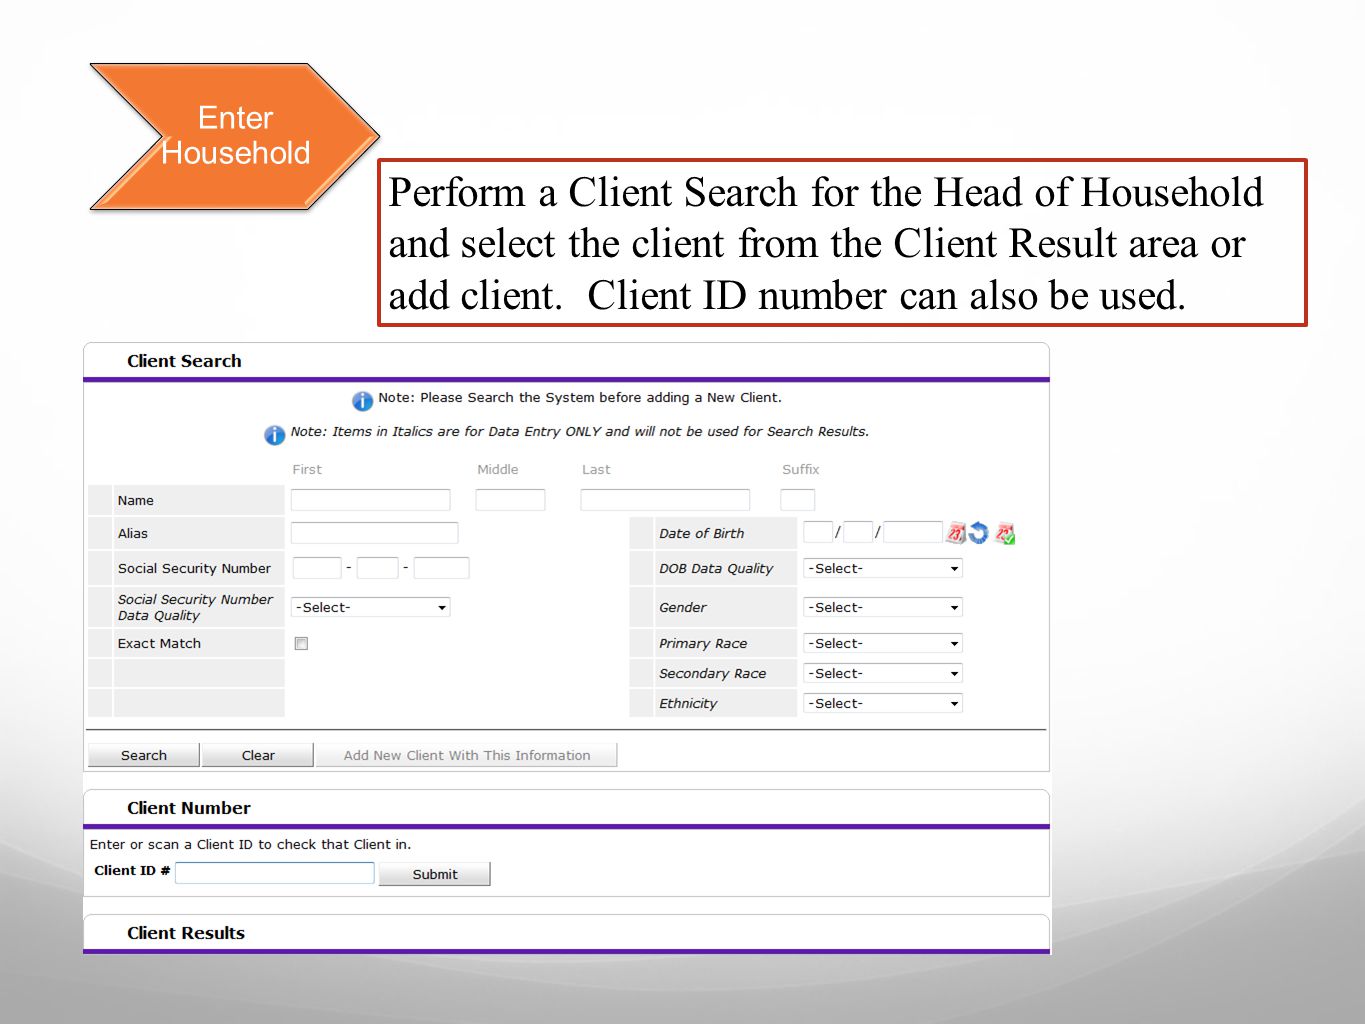 Enter Household Perform a Client Search for the Head of Household and select the client from the Client Result area or add client.